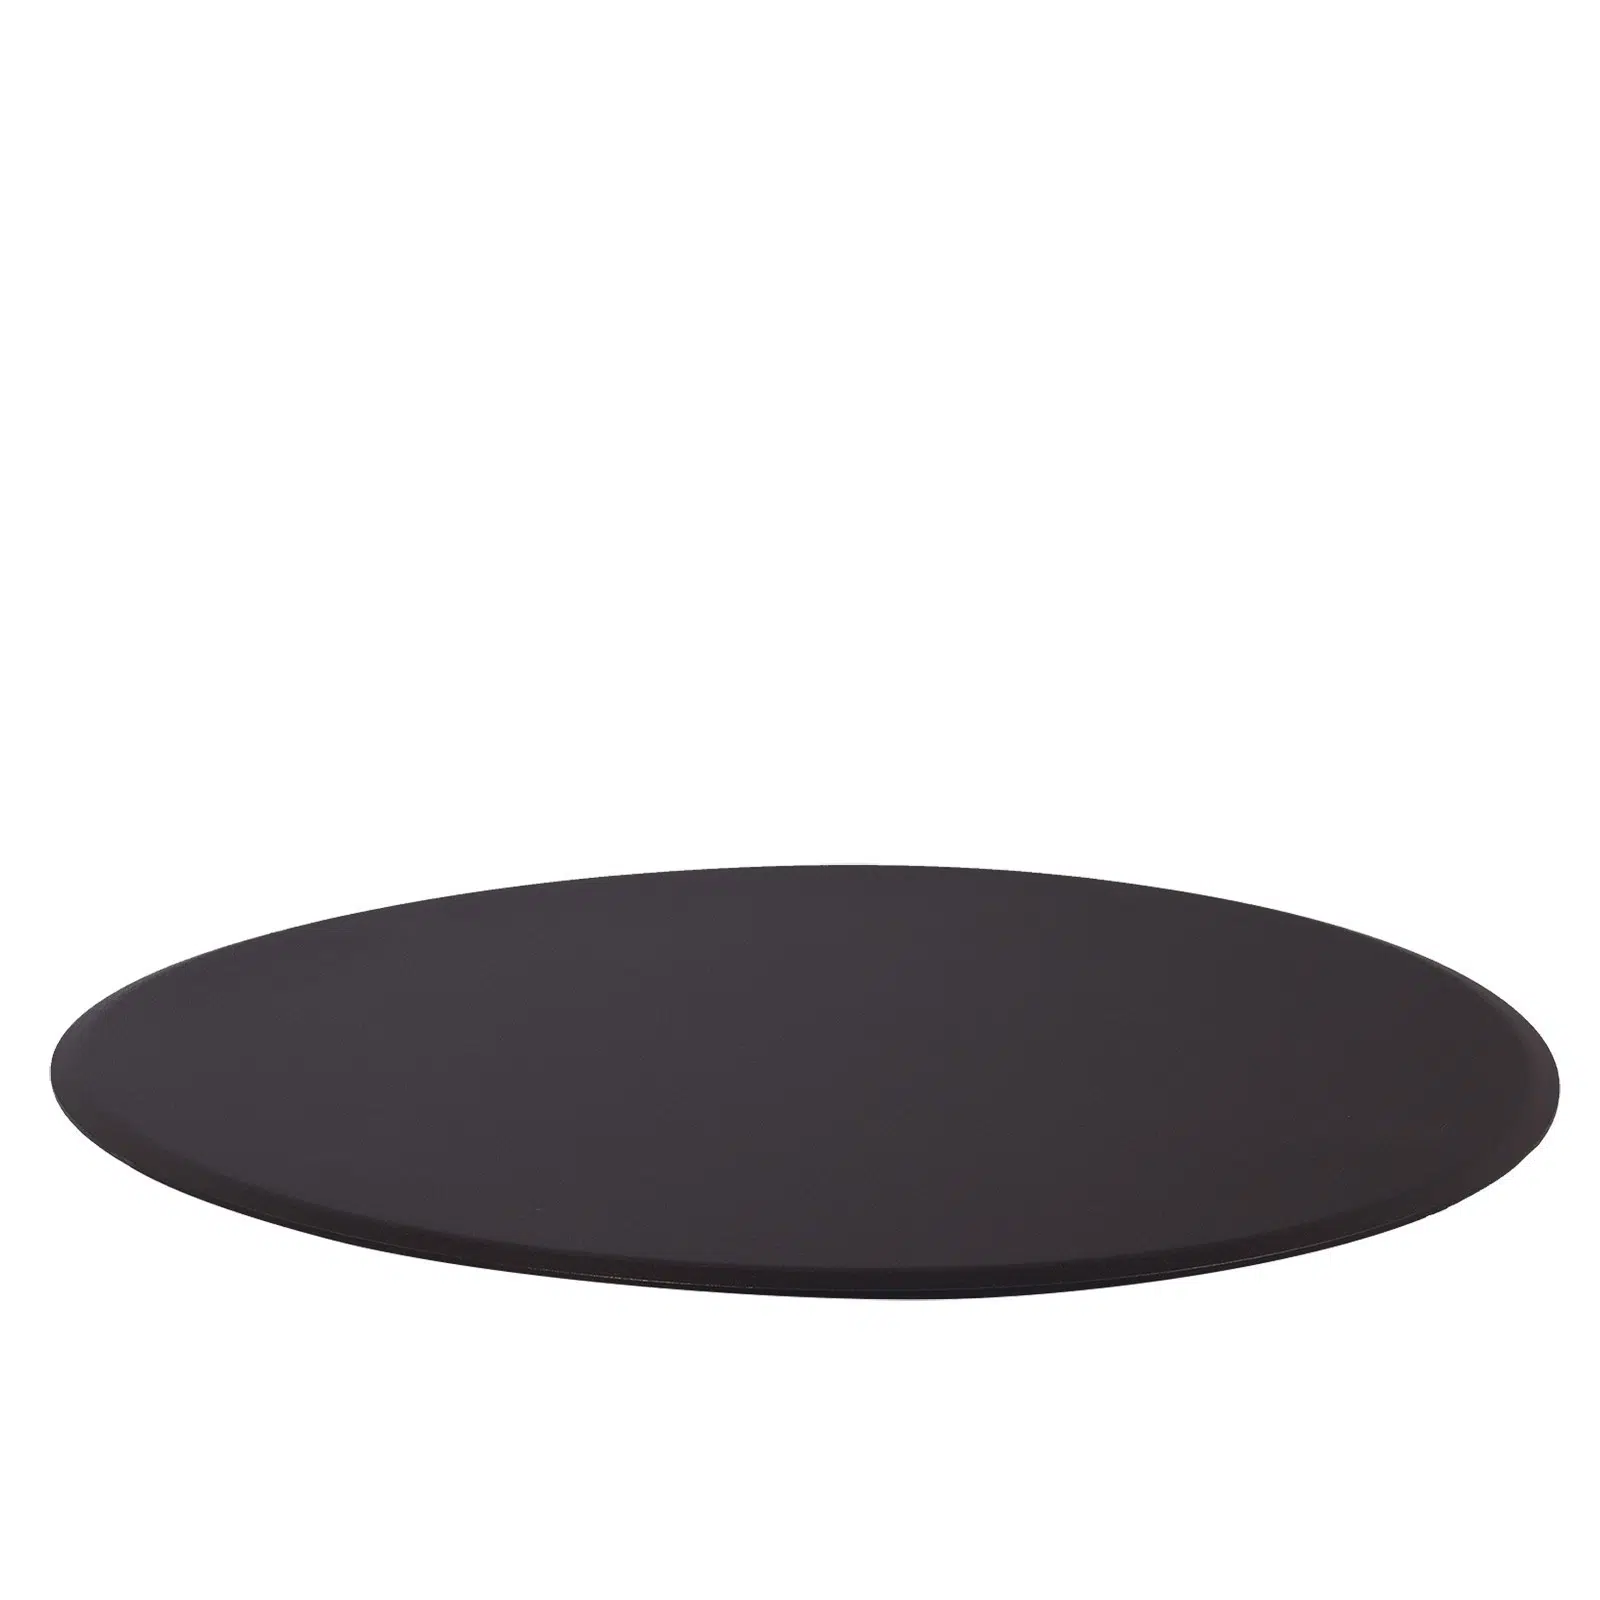 Fire Pit Accessories Large Round Fire Pit Flat Cover fits 24" Round Burner